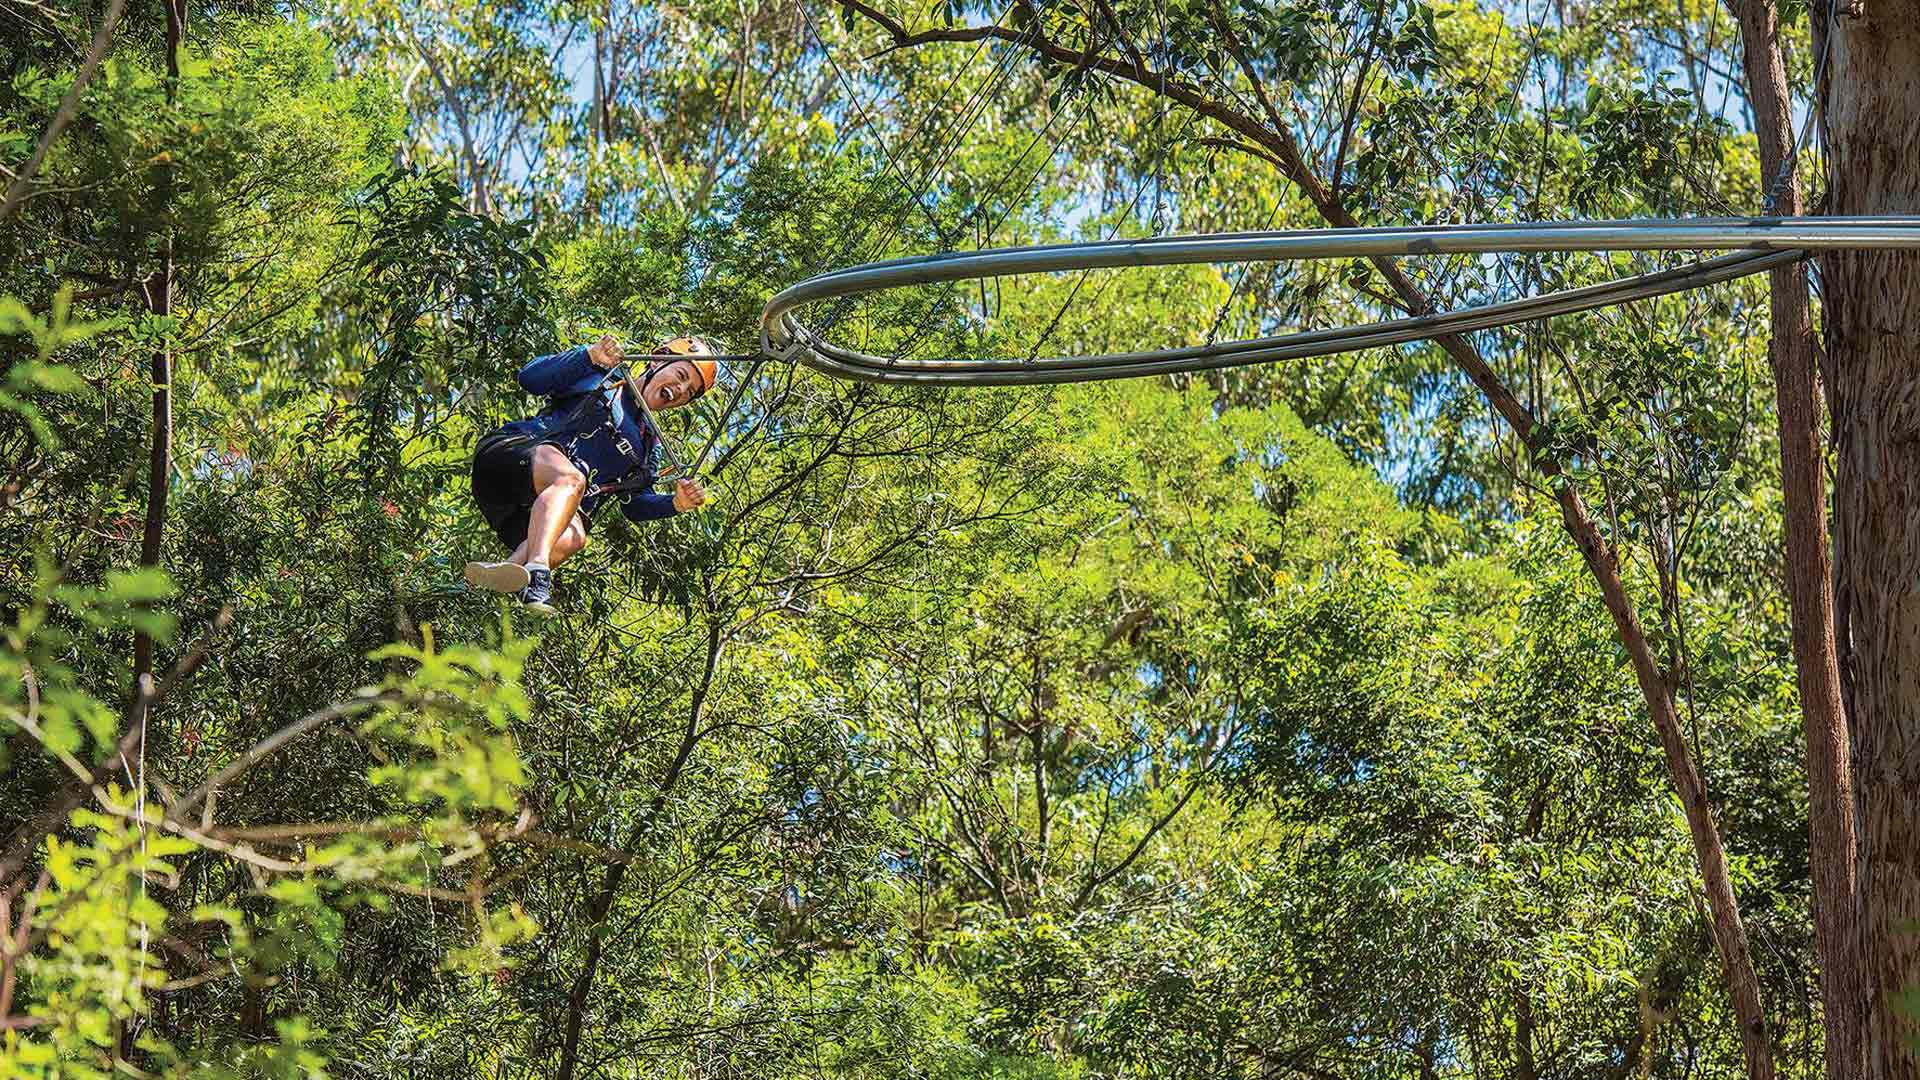 Western Sydney Will Soon Be Home to the World's Fastest Roller Coaster Zipline